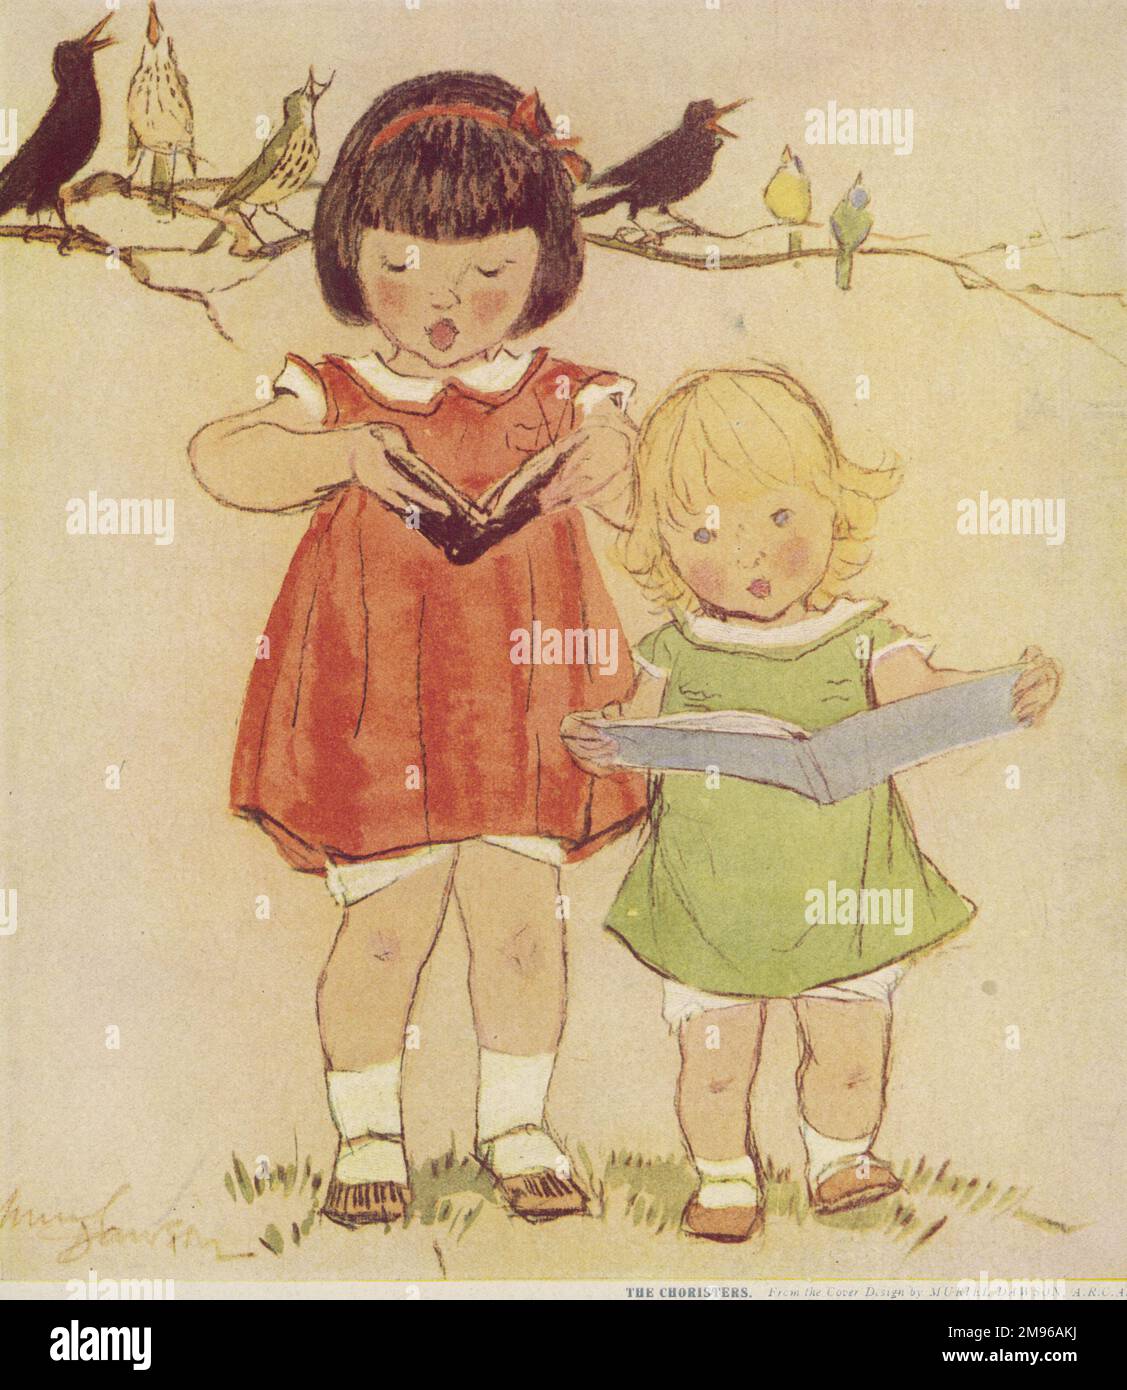 Two sweet little girls stand together and sing from song books, accompanied by chirping birds on a tree branch behind them. Stock Photo